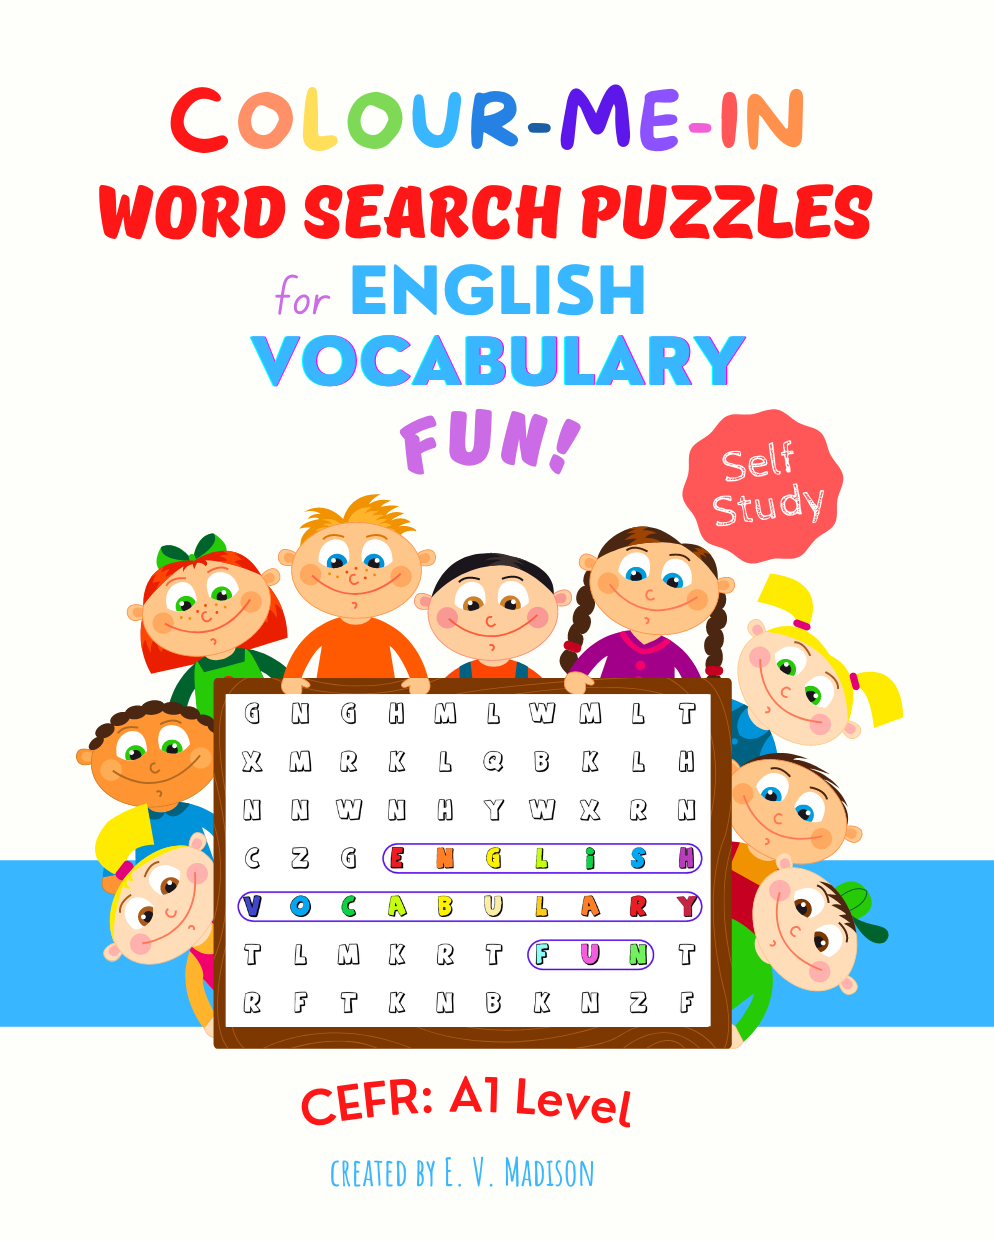 Colour-Me-In Word Search Puzzles for English Vocabulary Fun! A1 Level